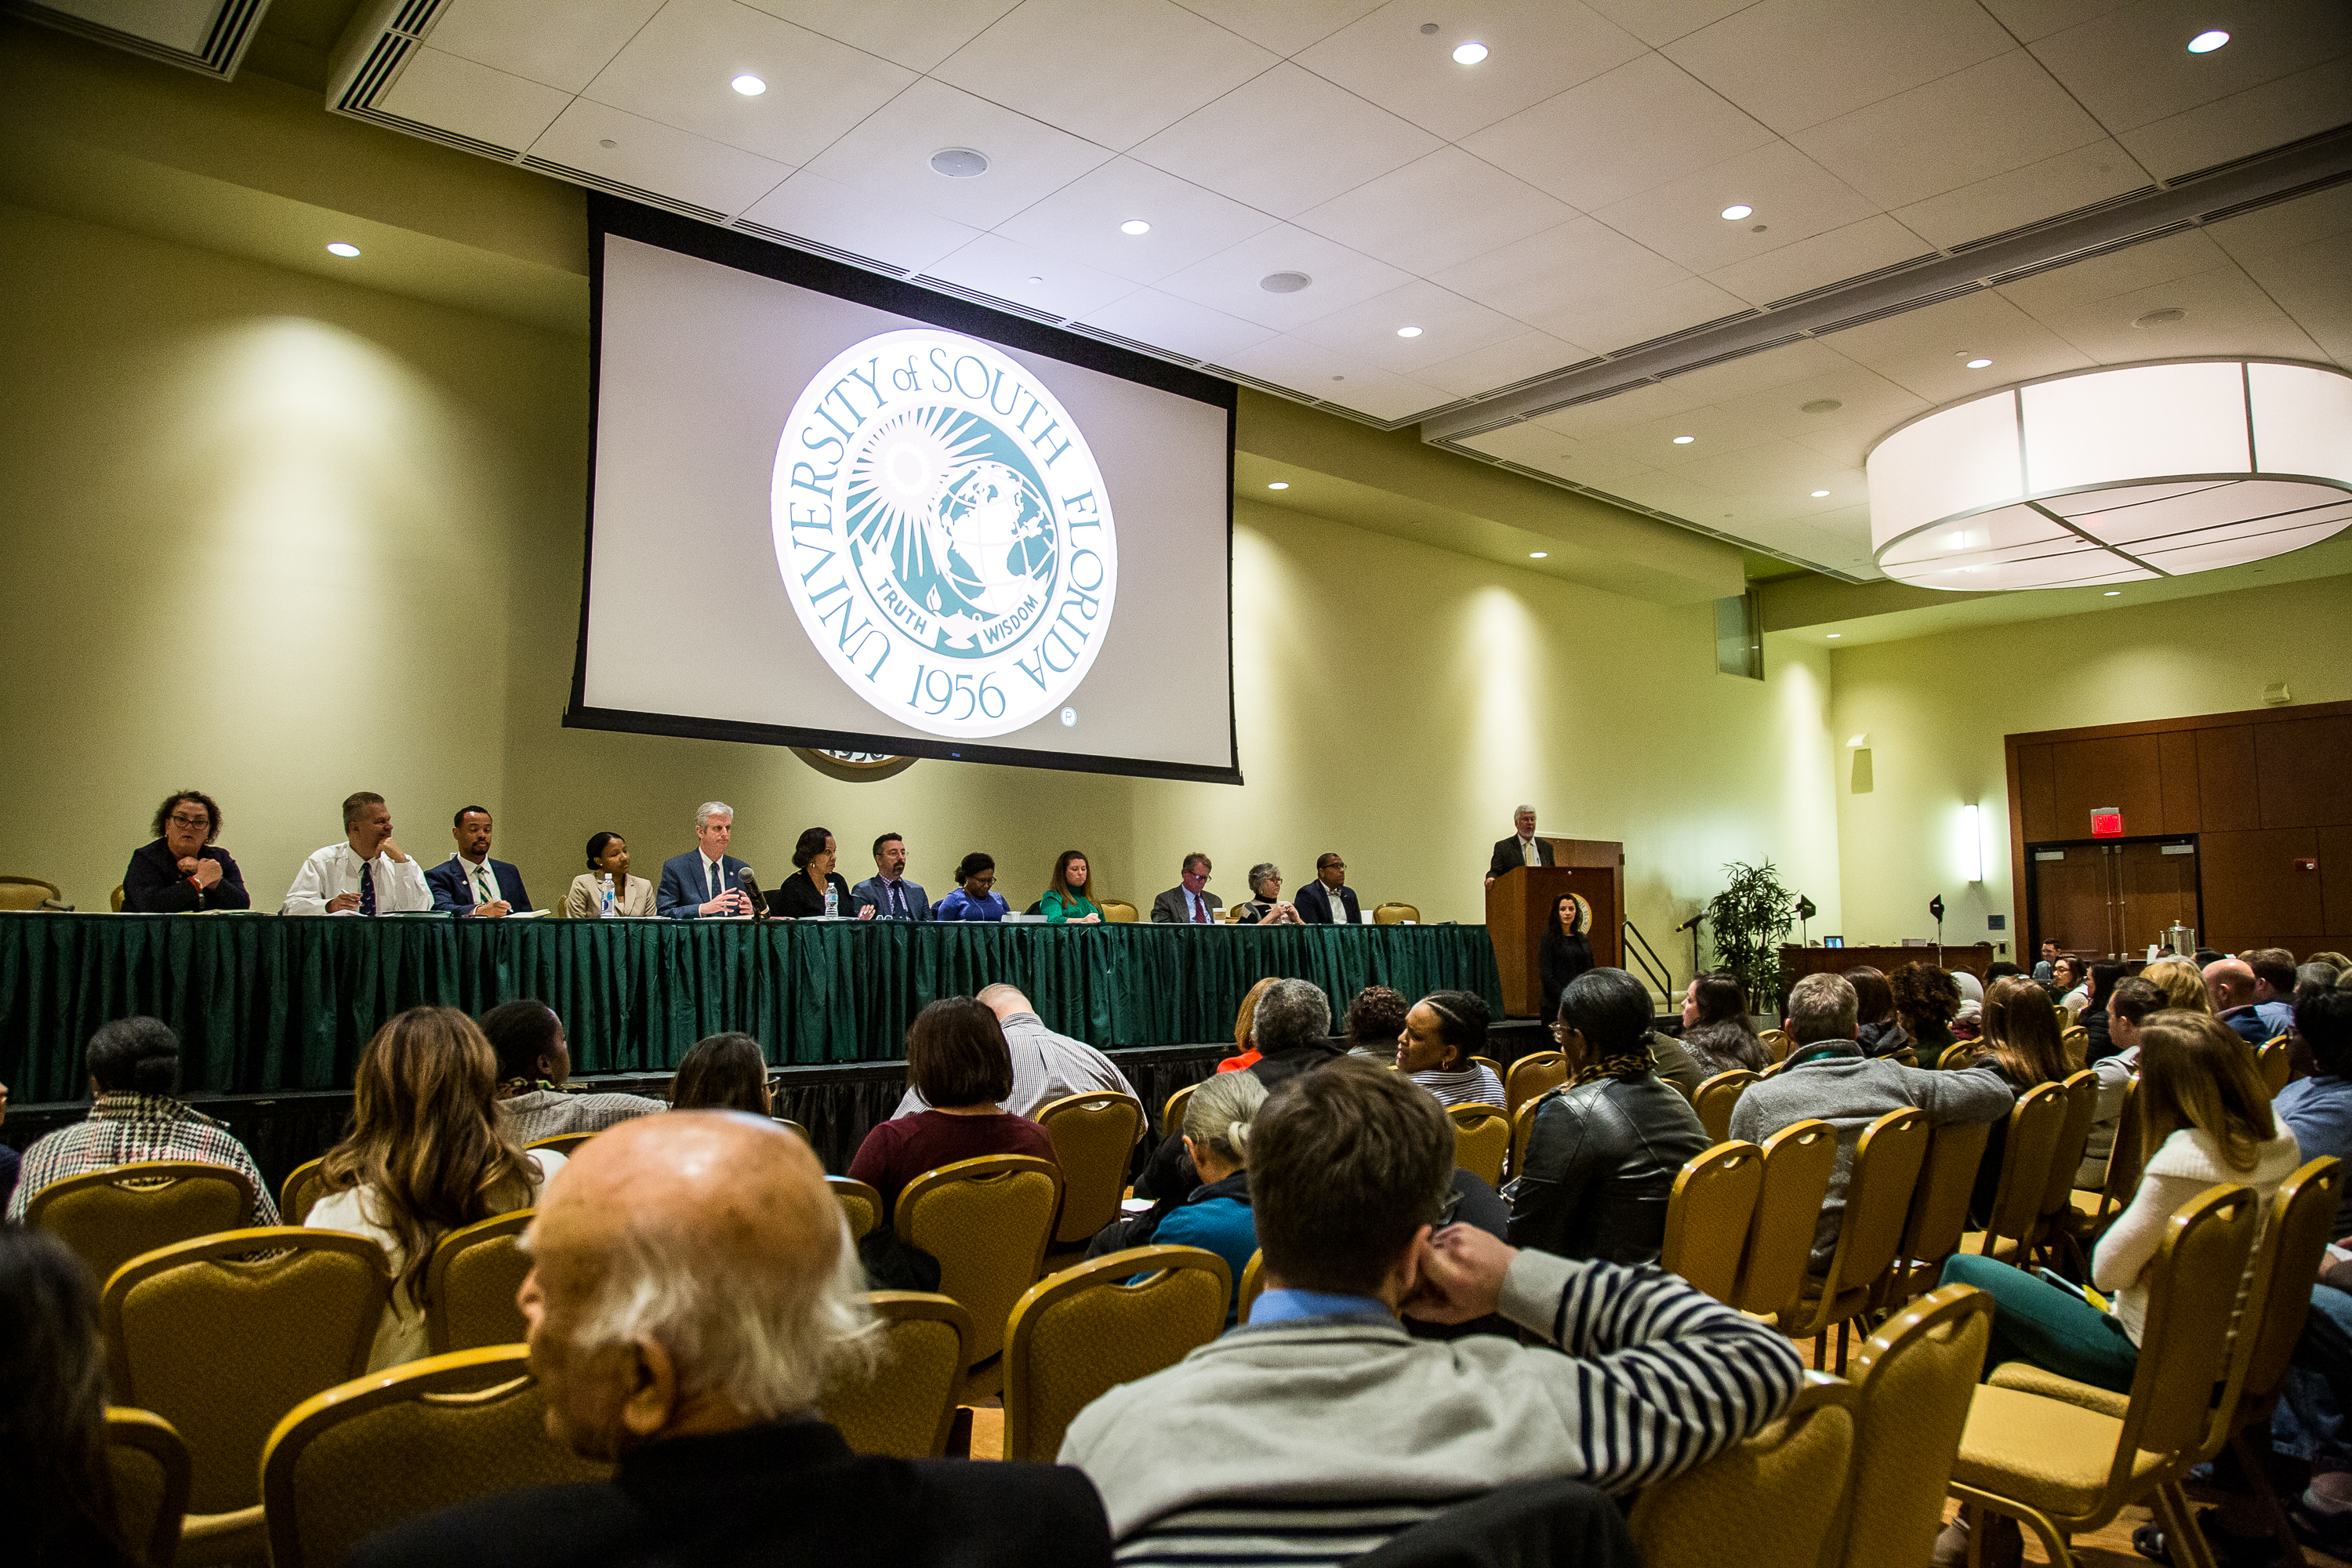 USF faculty express concerns about diversity, respect